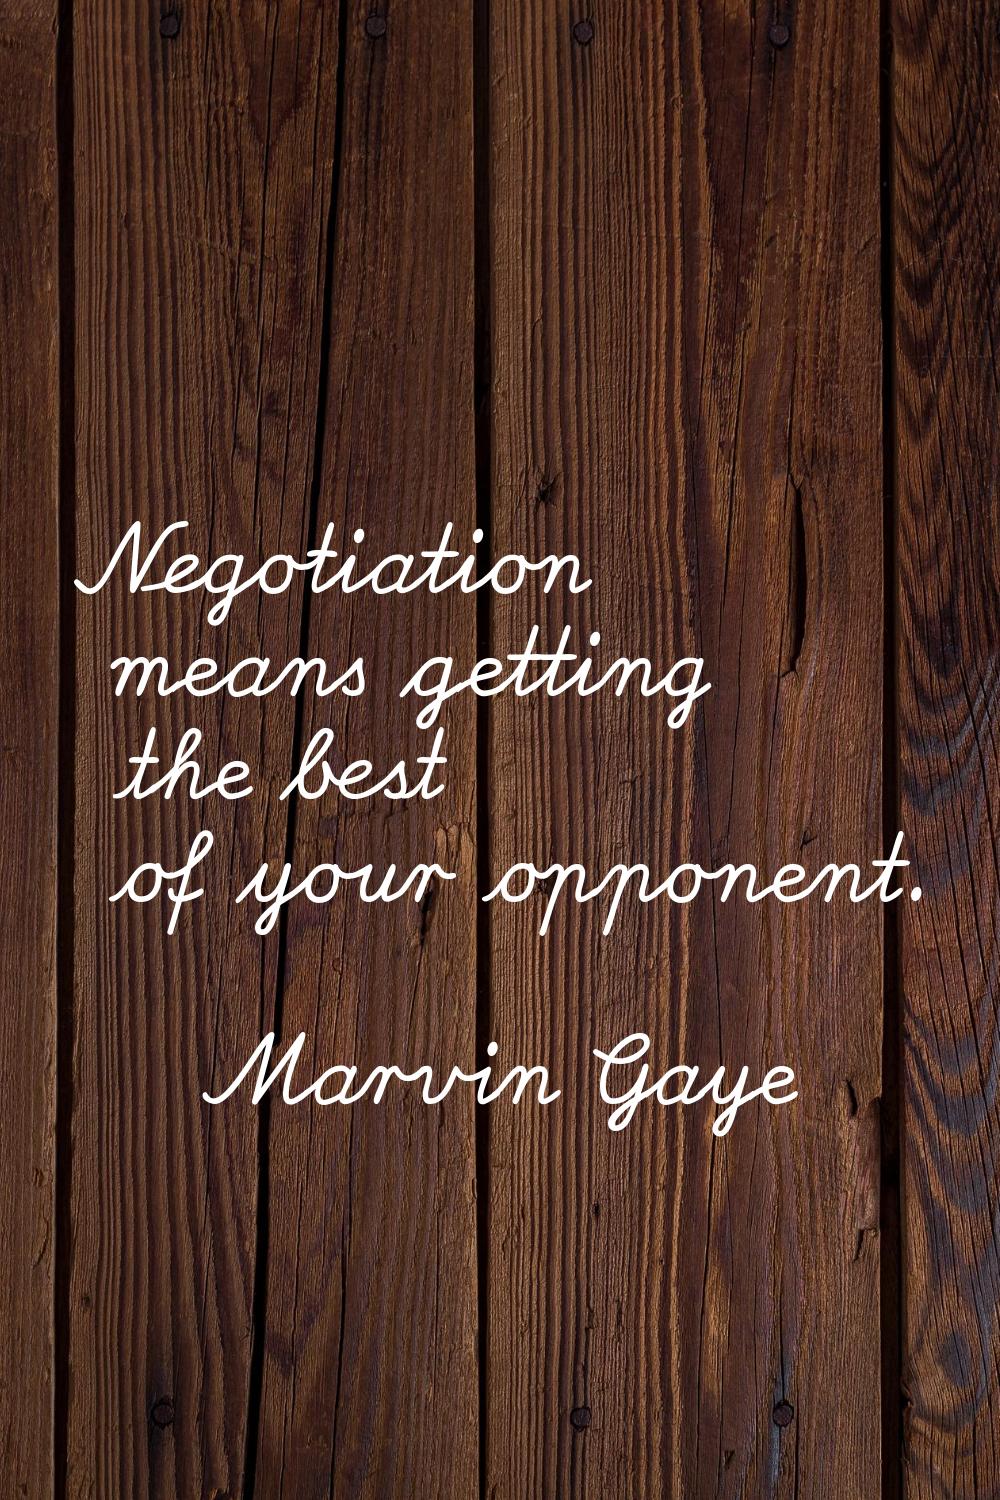 Negotiation means getting the best of your opponent.